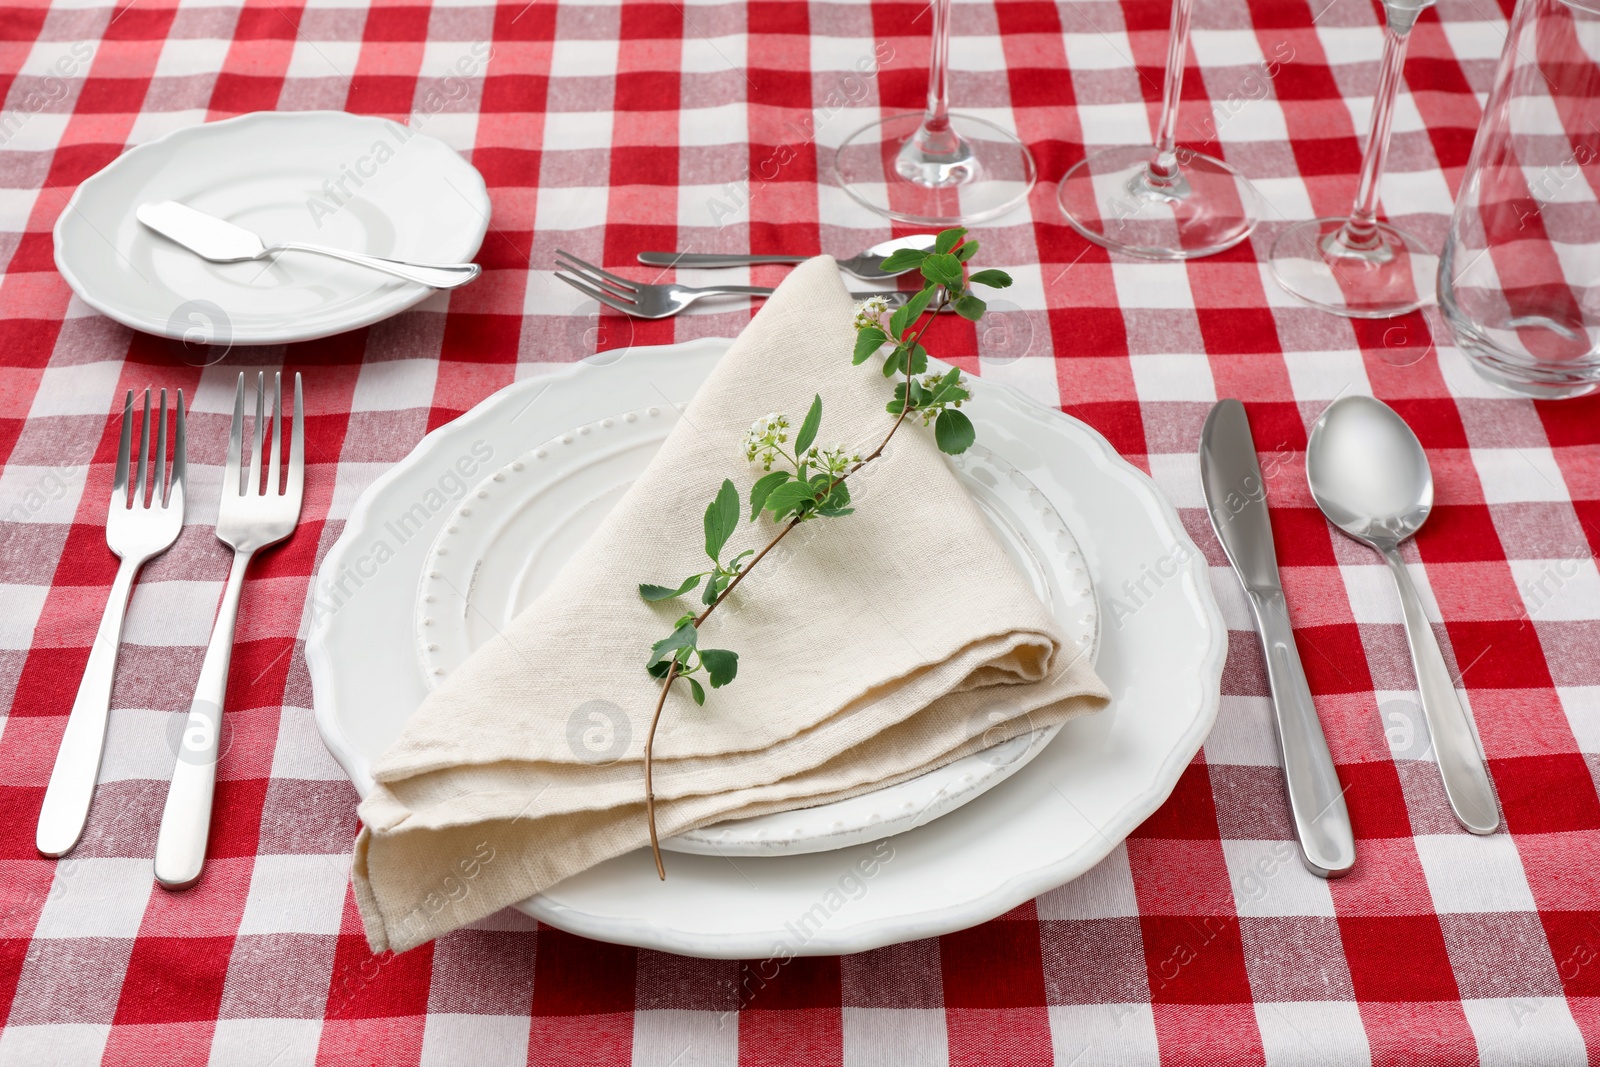 Photo of Stylish setting with cutlery, plates, napkin and floral decor on table